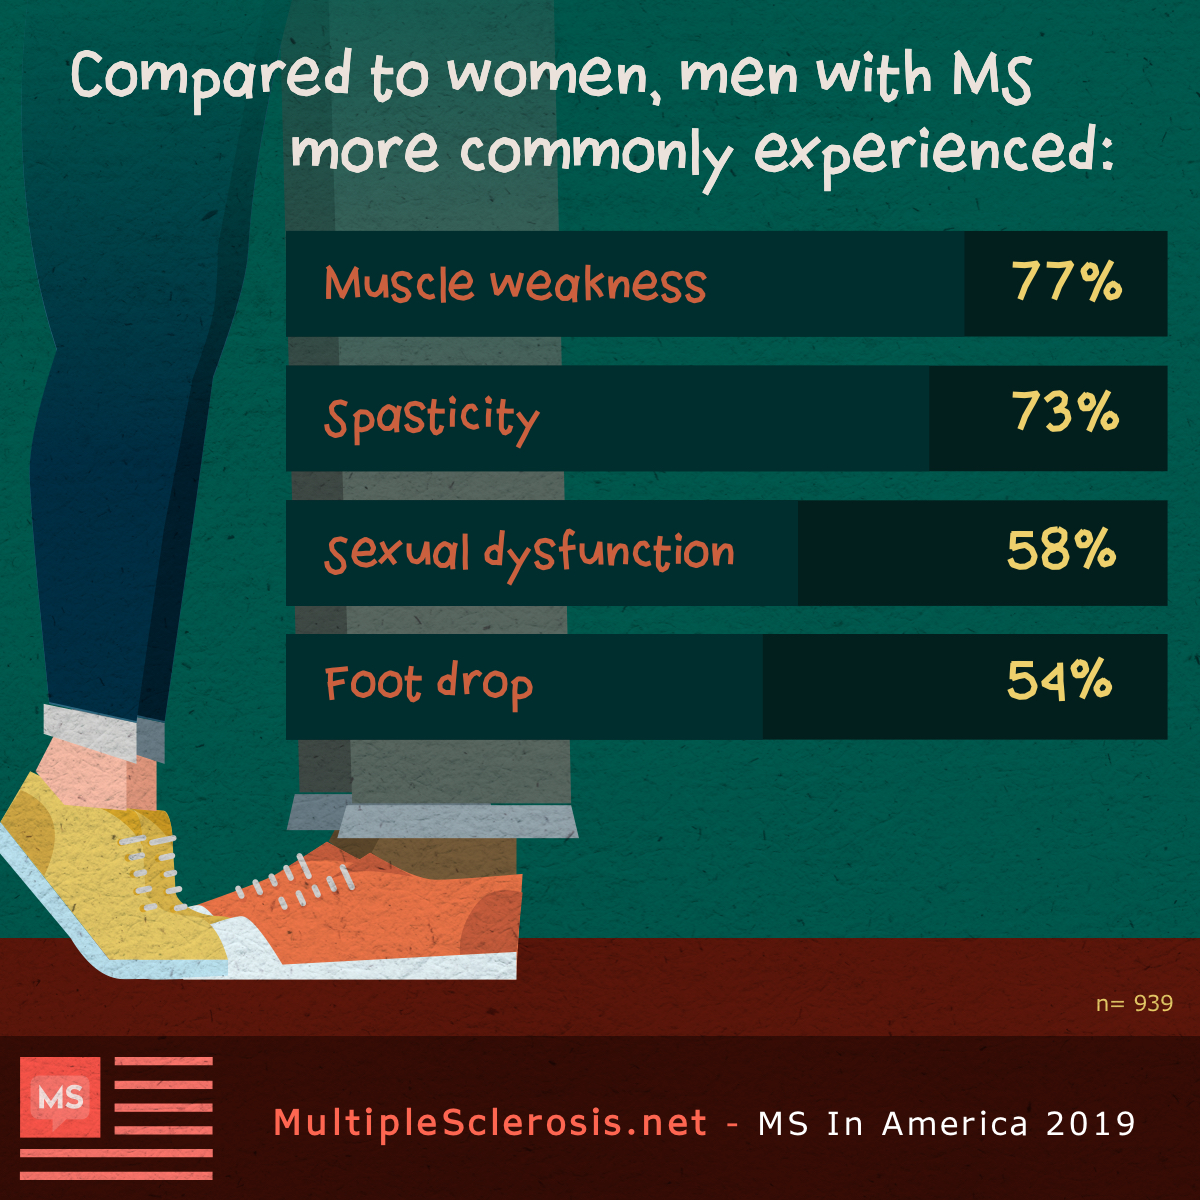 Men with MS experienced muscle weakness (77%), spasticity (73%), sexual dysfunction (58%), and foot drop (54%) more commonly than women. 